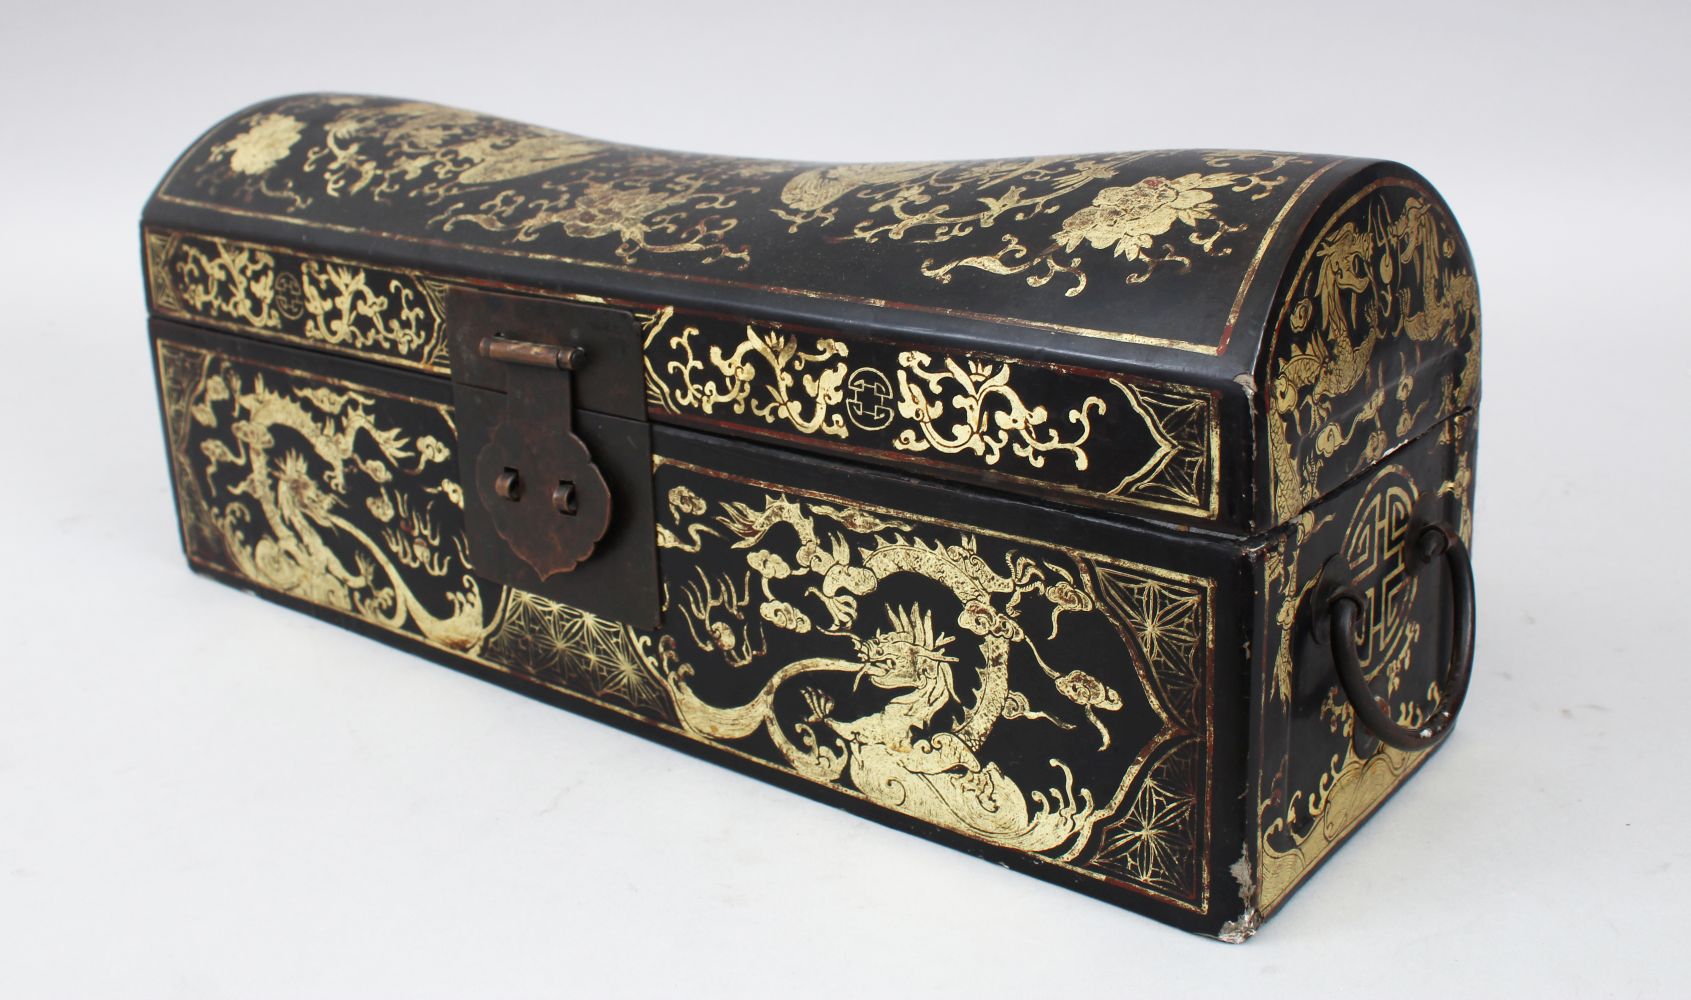 A GOOD 19TH CENTURY CHINESE LACQUER CHEST / BOX, the lacquer box with gilded decoration of dragons